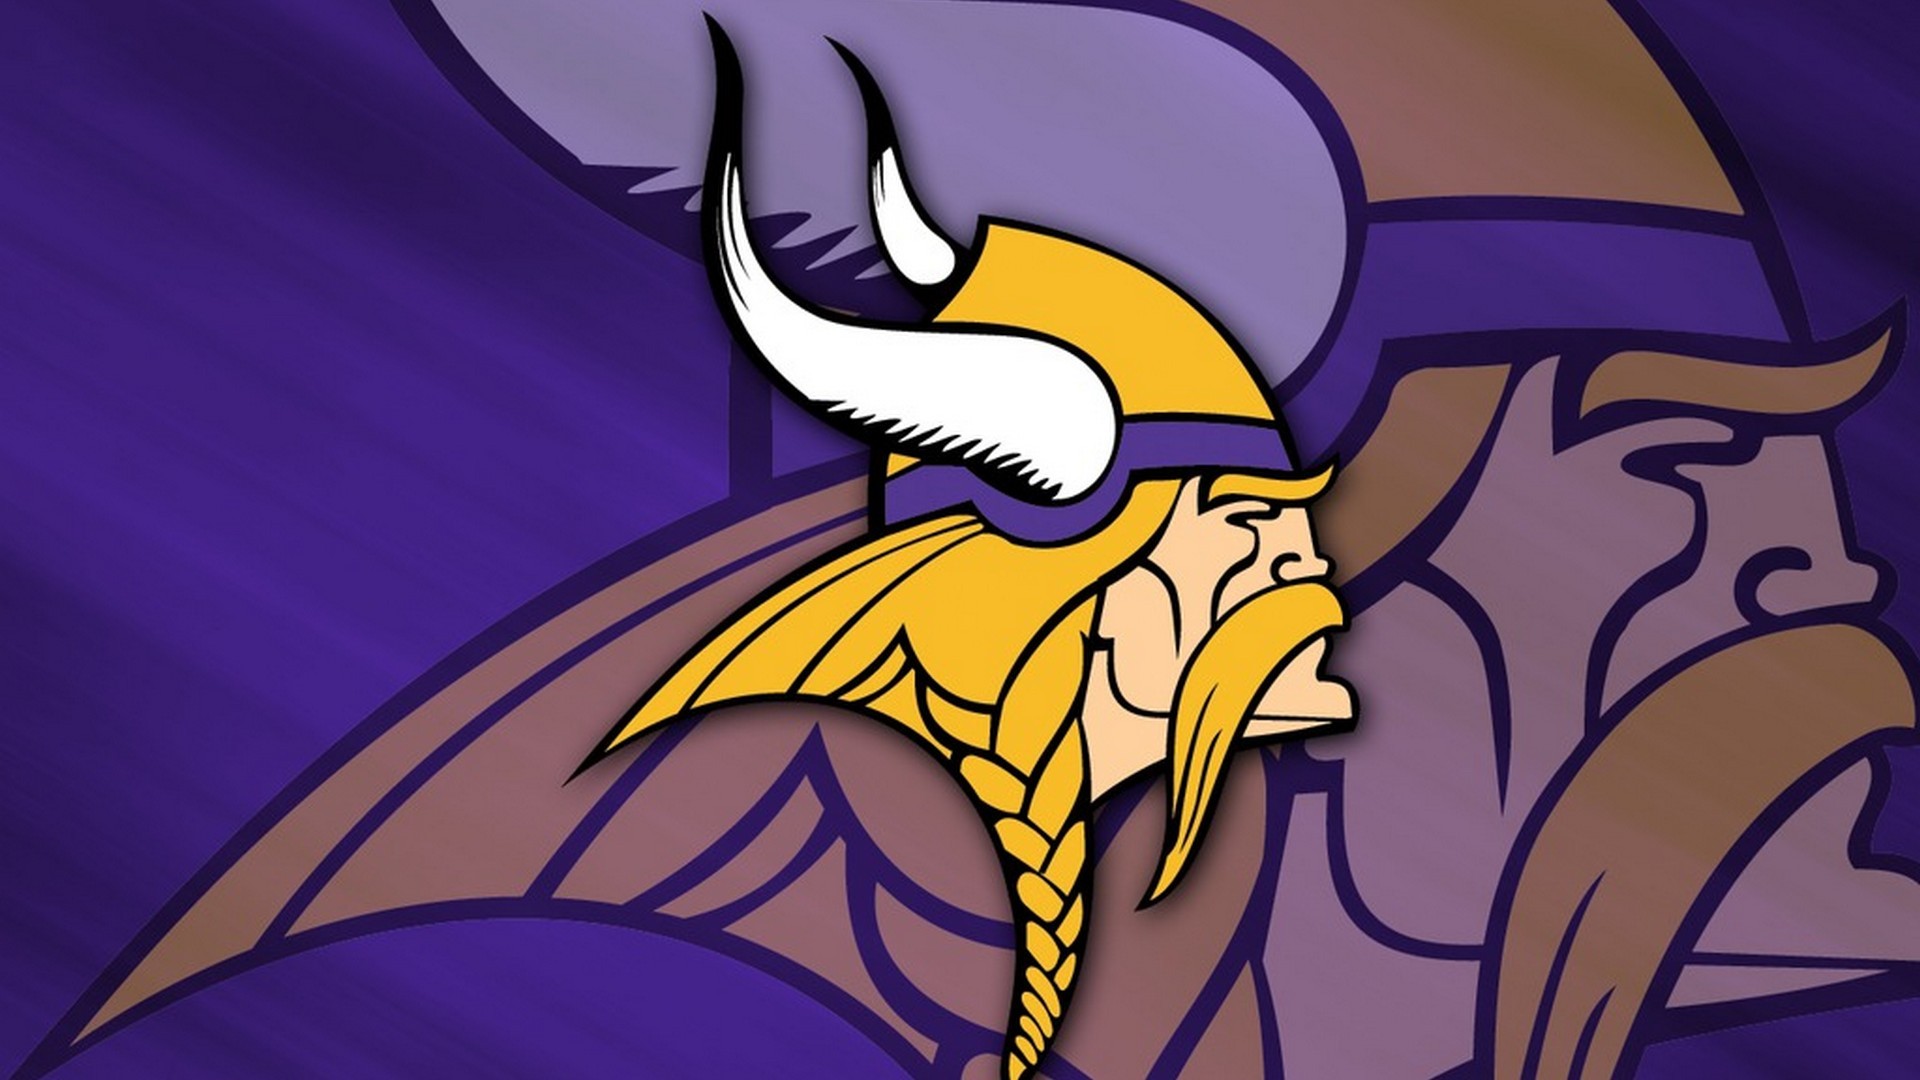 Wallpaper Desktop Minnesota Vikings NFL HD With high-resolution 1920X1080 pixel. You can use this wallpaper for your Mac or Windows Desktop Background, iPhone, Android or Tablet and another Smartphone device